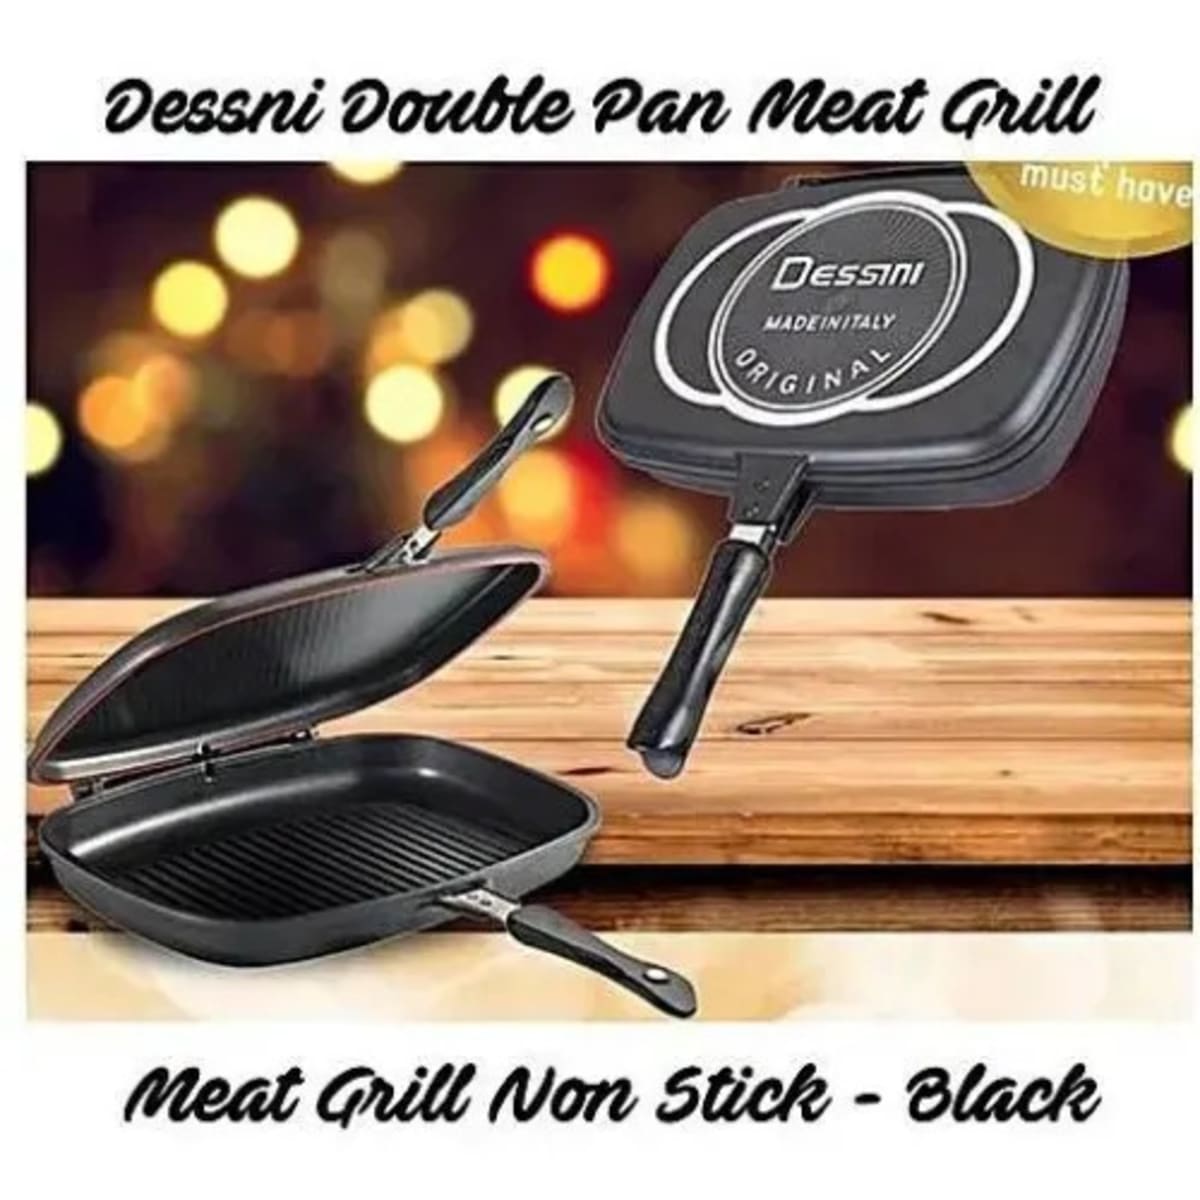 Double Grill Frying Pan, Double Sided Pan, Baking Tray